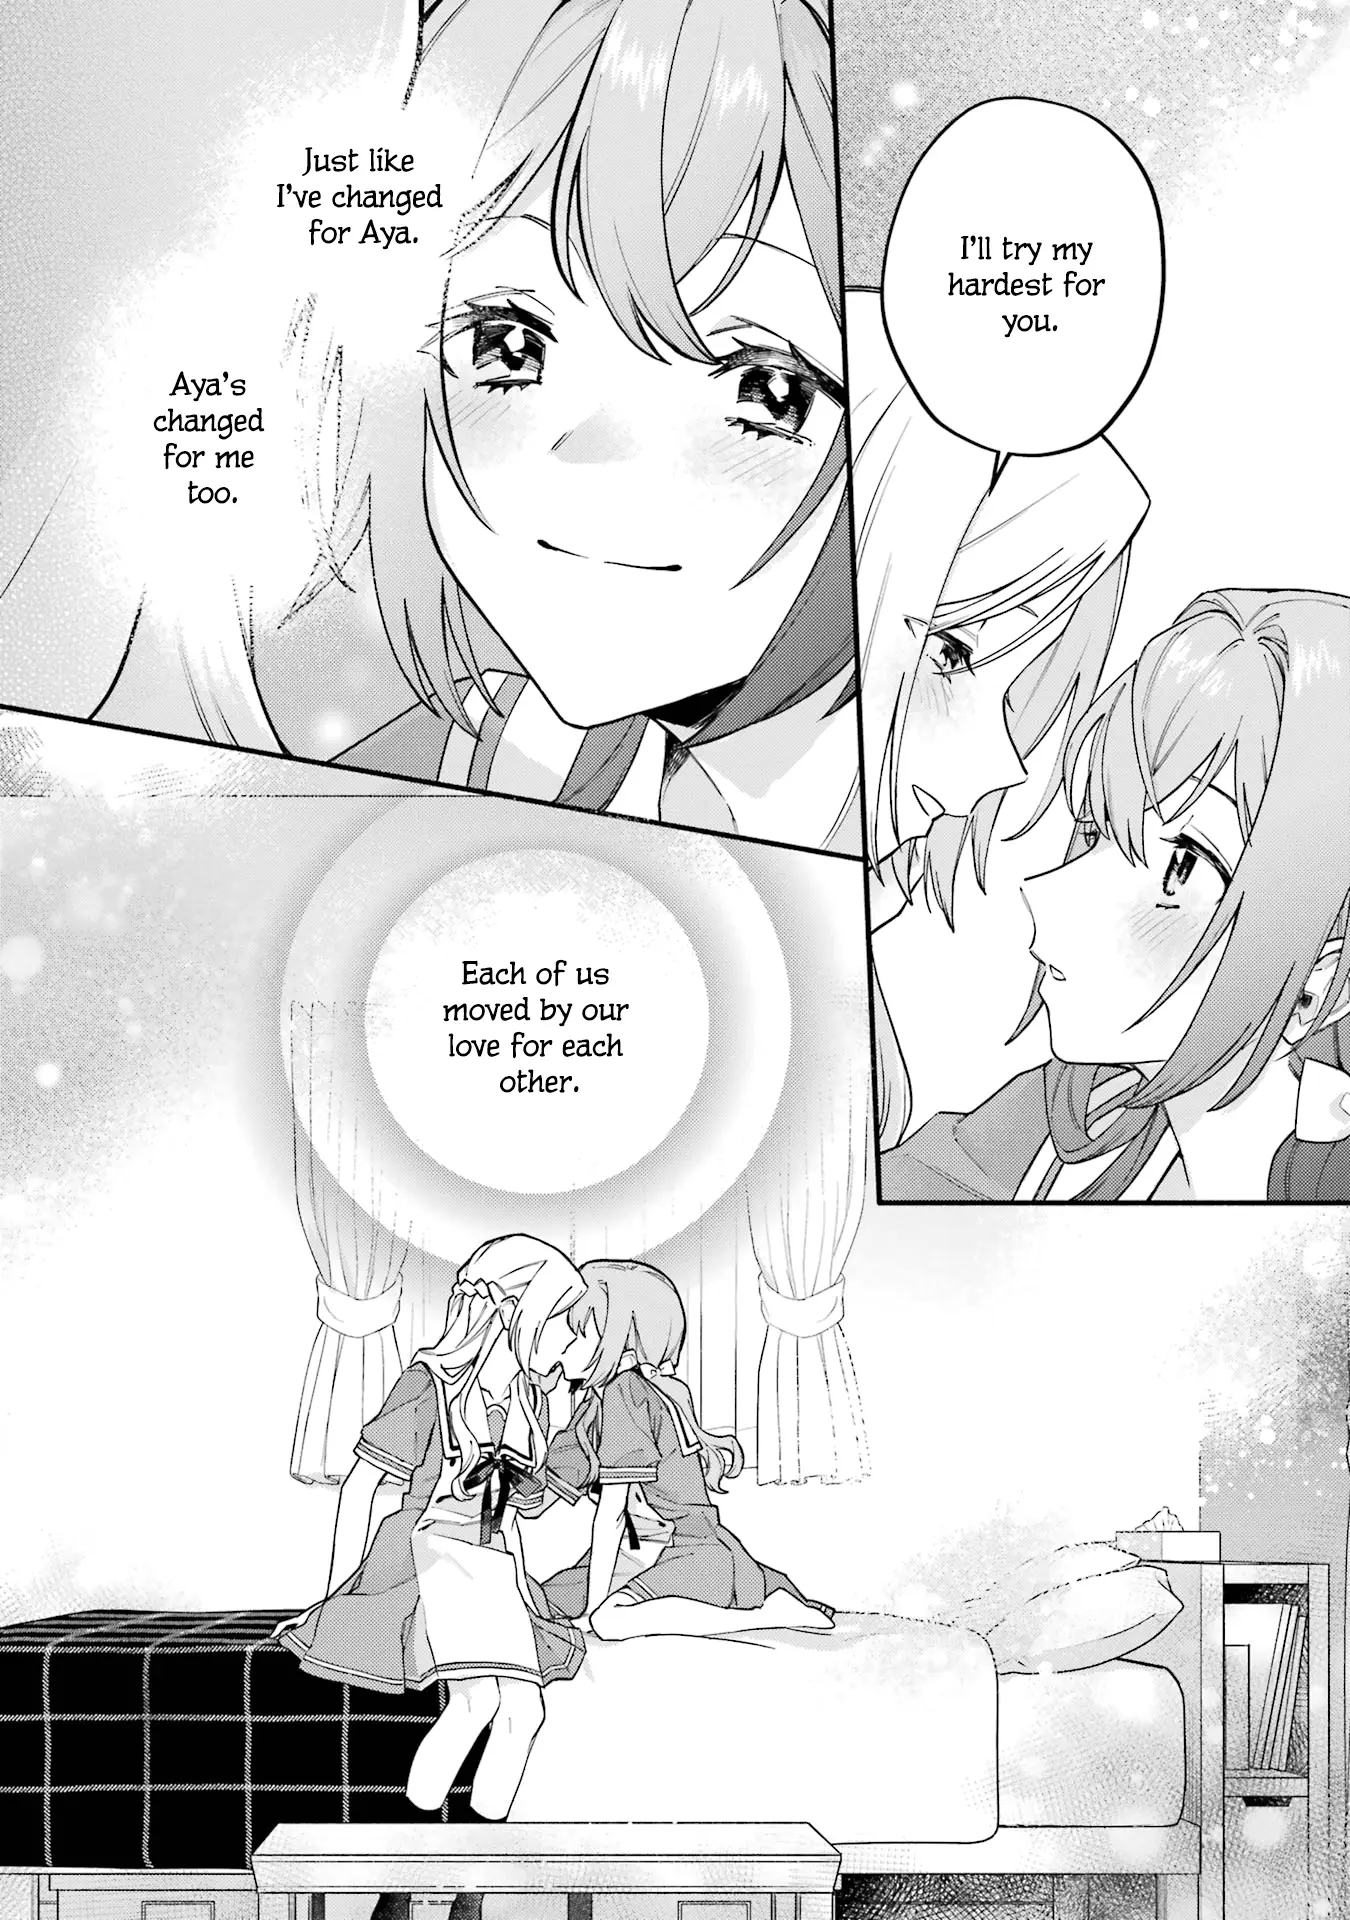 A Yuri Story About A Girl Who Insists "it's Impossible For Two Girls To Get Together" Completely Falling Within 100 Days - 15 page 15-35700910